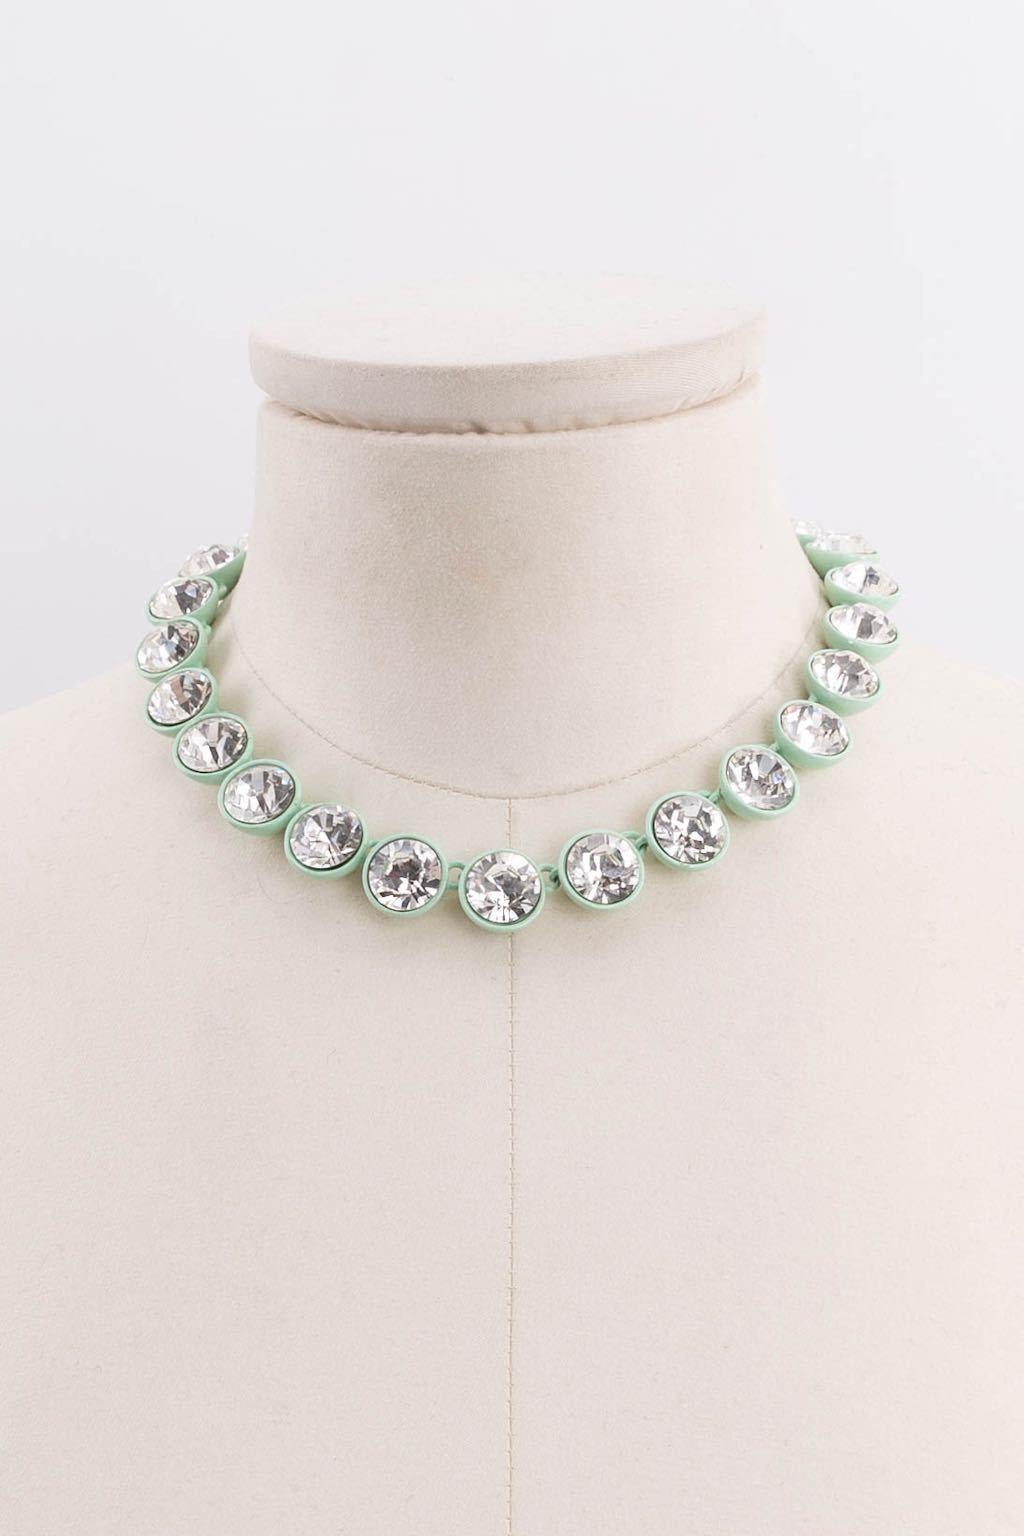 Balenciaga - Short necklace in enamelled metal made of rhinestones.

Additional information: 
Dimensions: Length: 36.5 cm (14.37 in) to 41 cm (16.14 in)
Condition: Very good condition
Seller Ref number: BC88